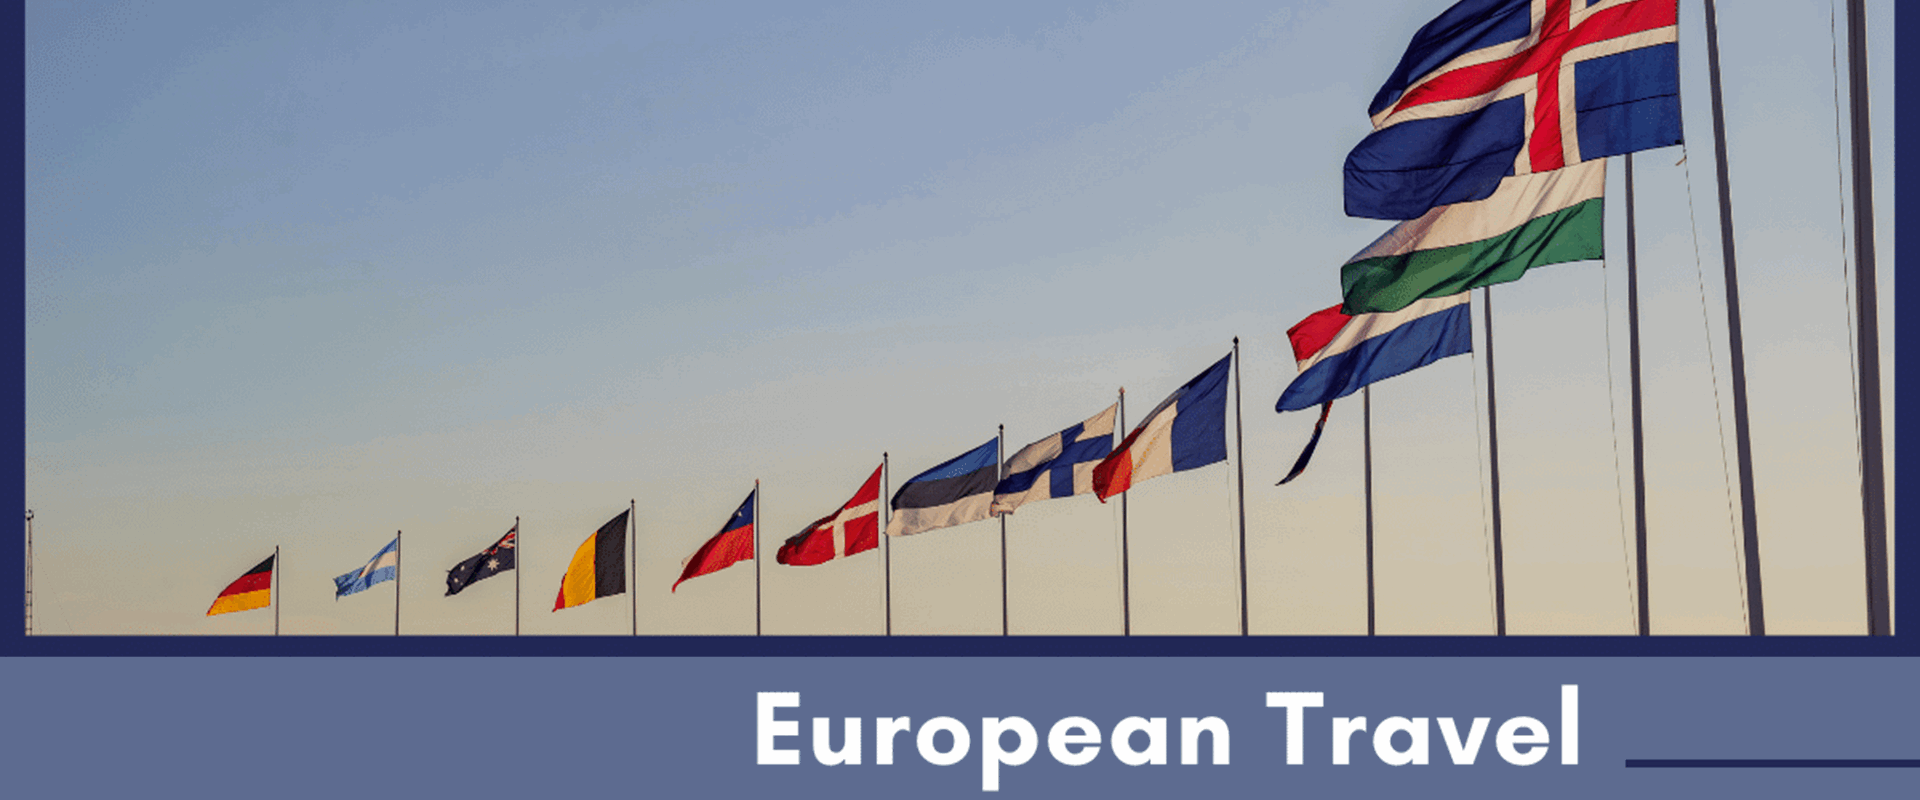 Travel Regulations For European Countries